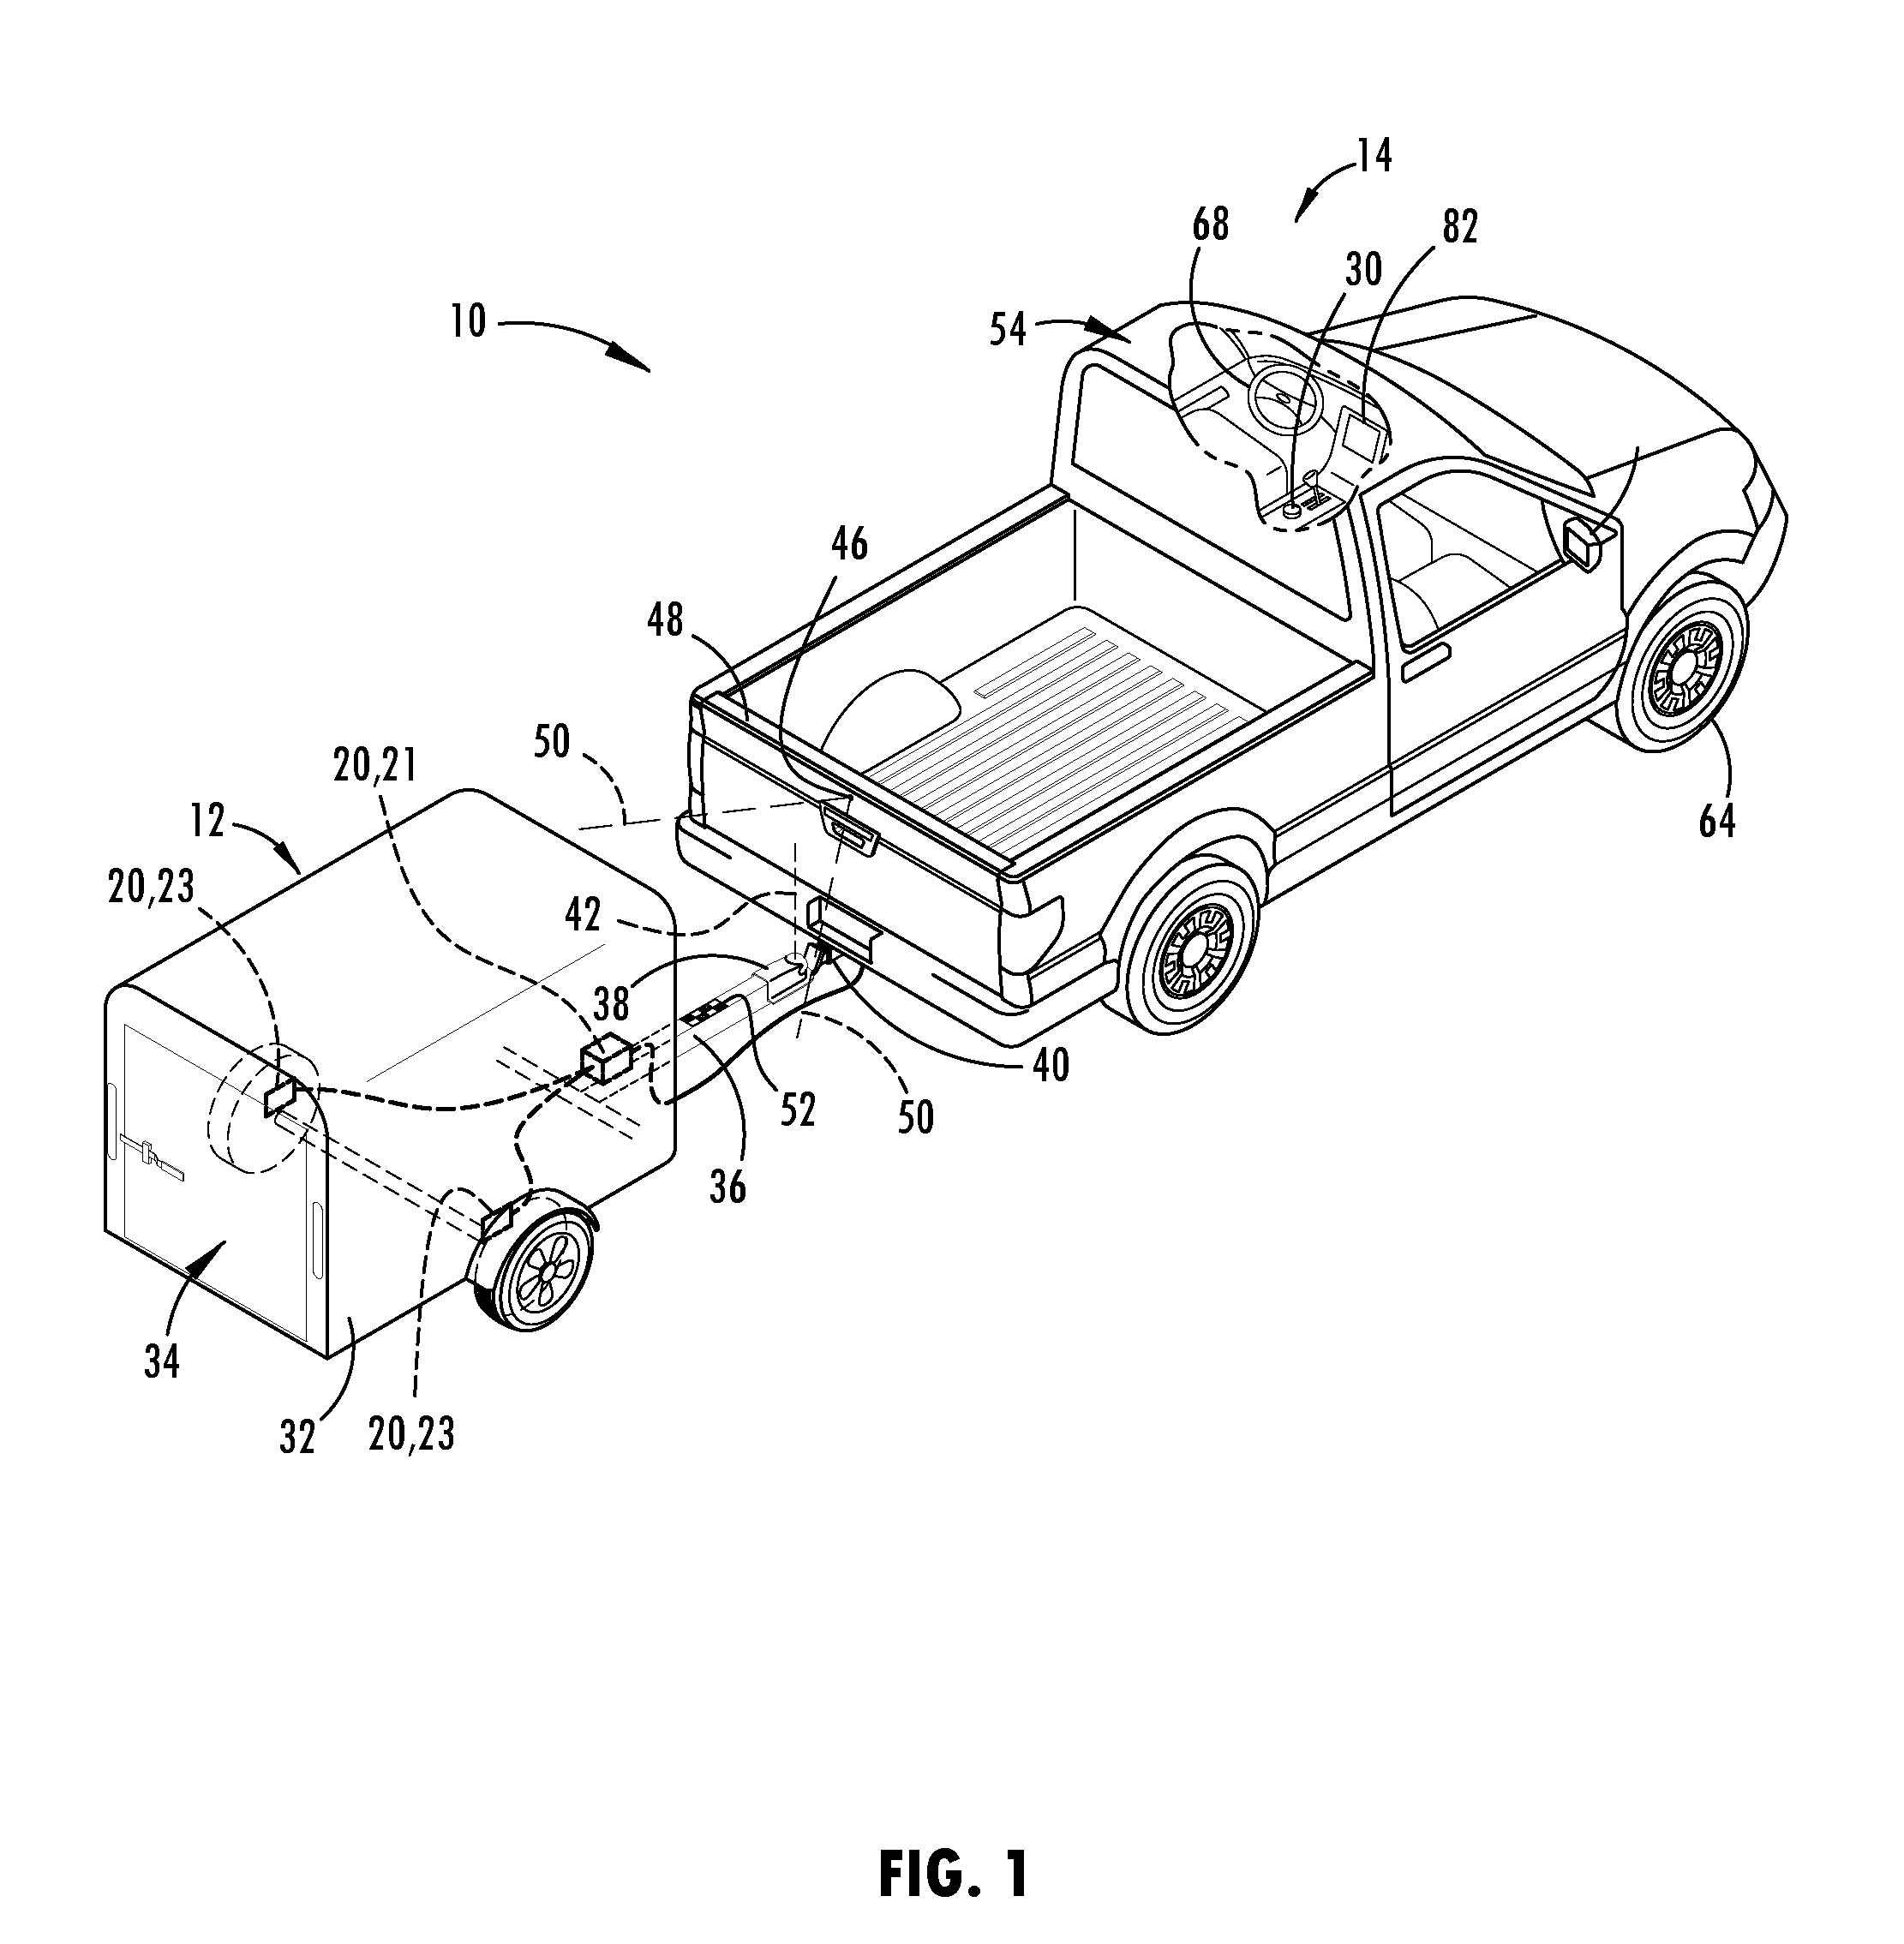 Trailer sensor module and associated method of wireless trailer identification and motion estimation